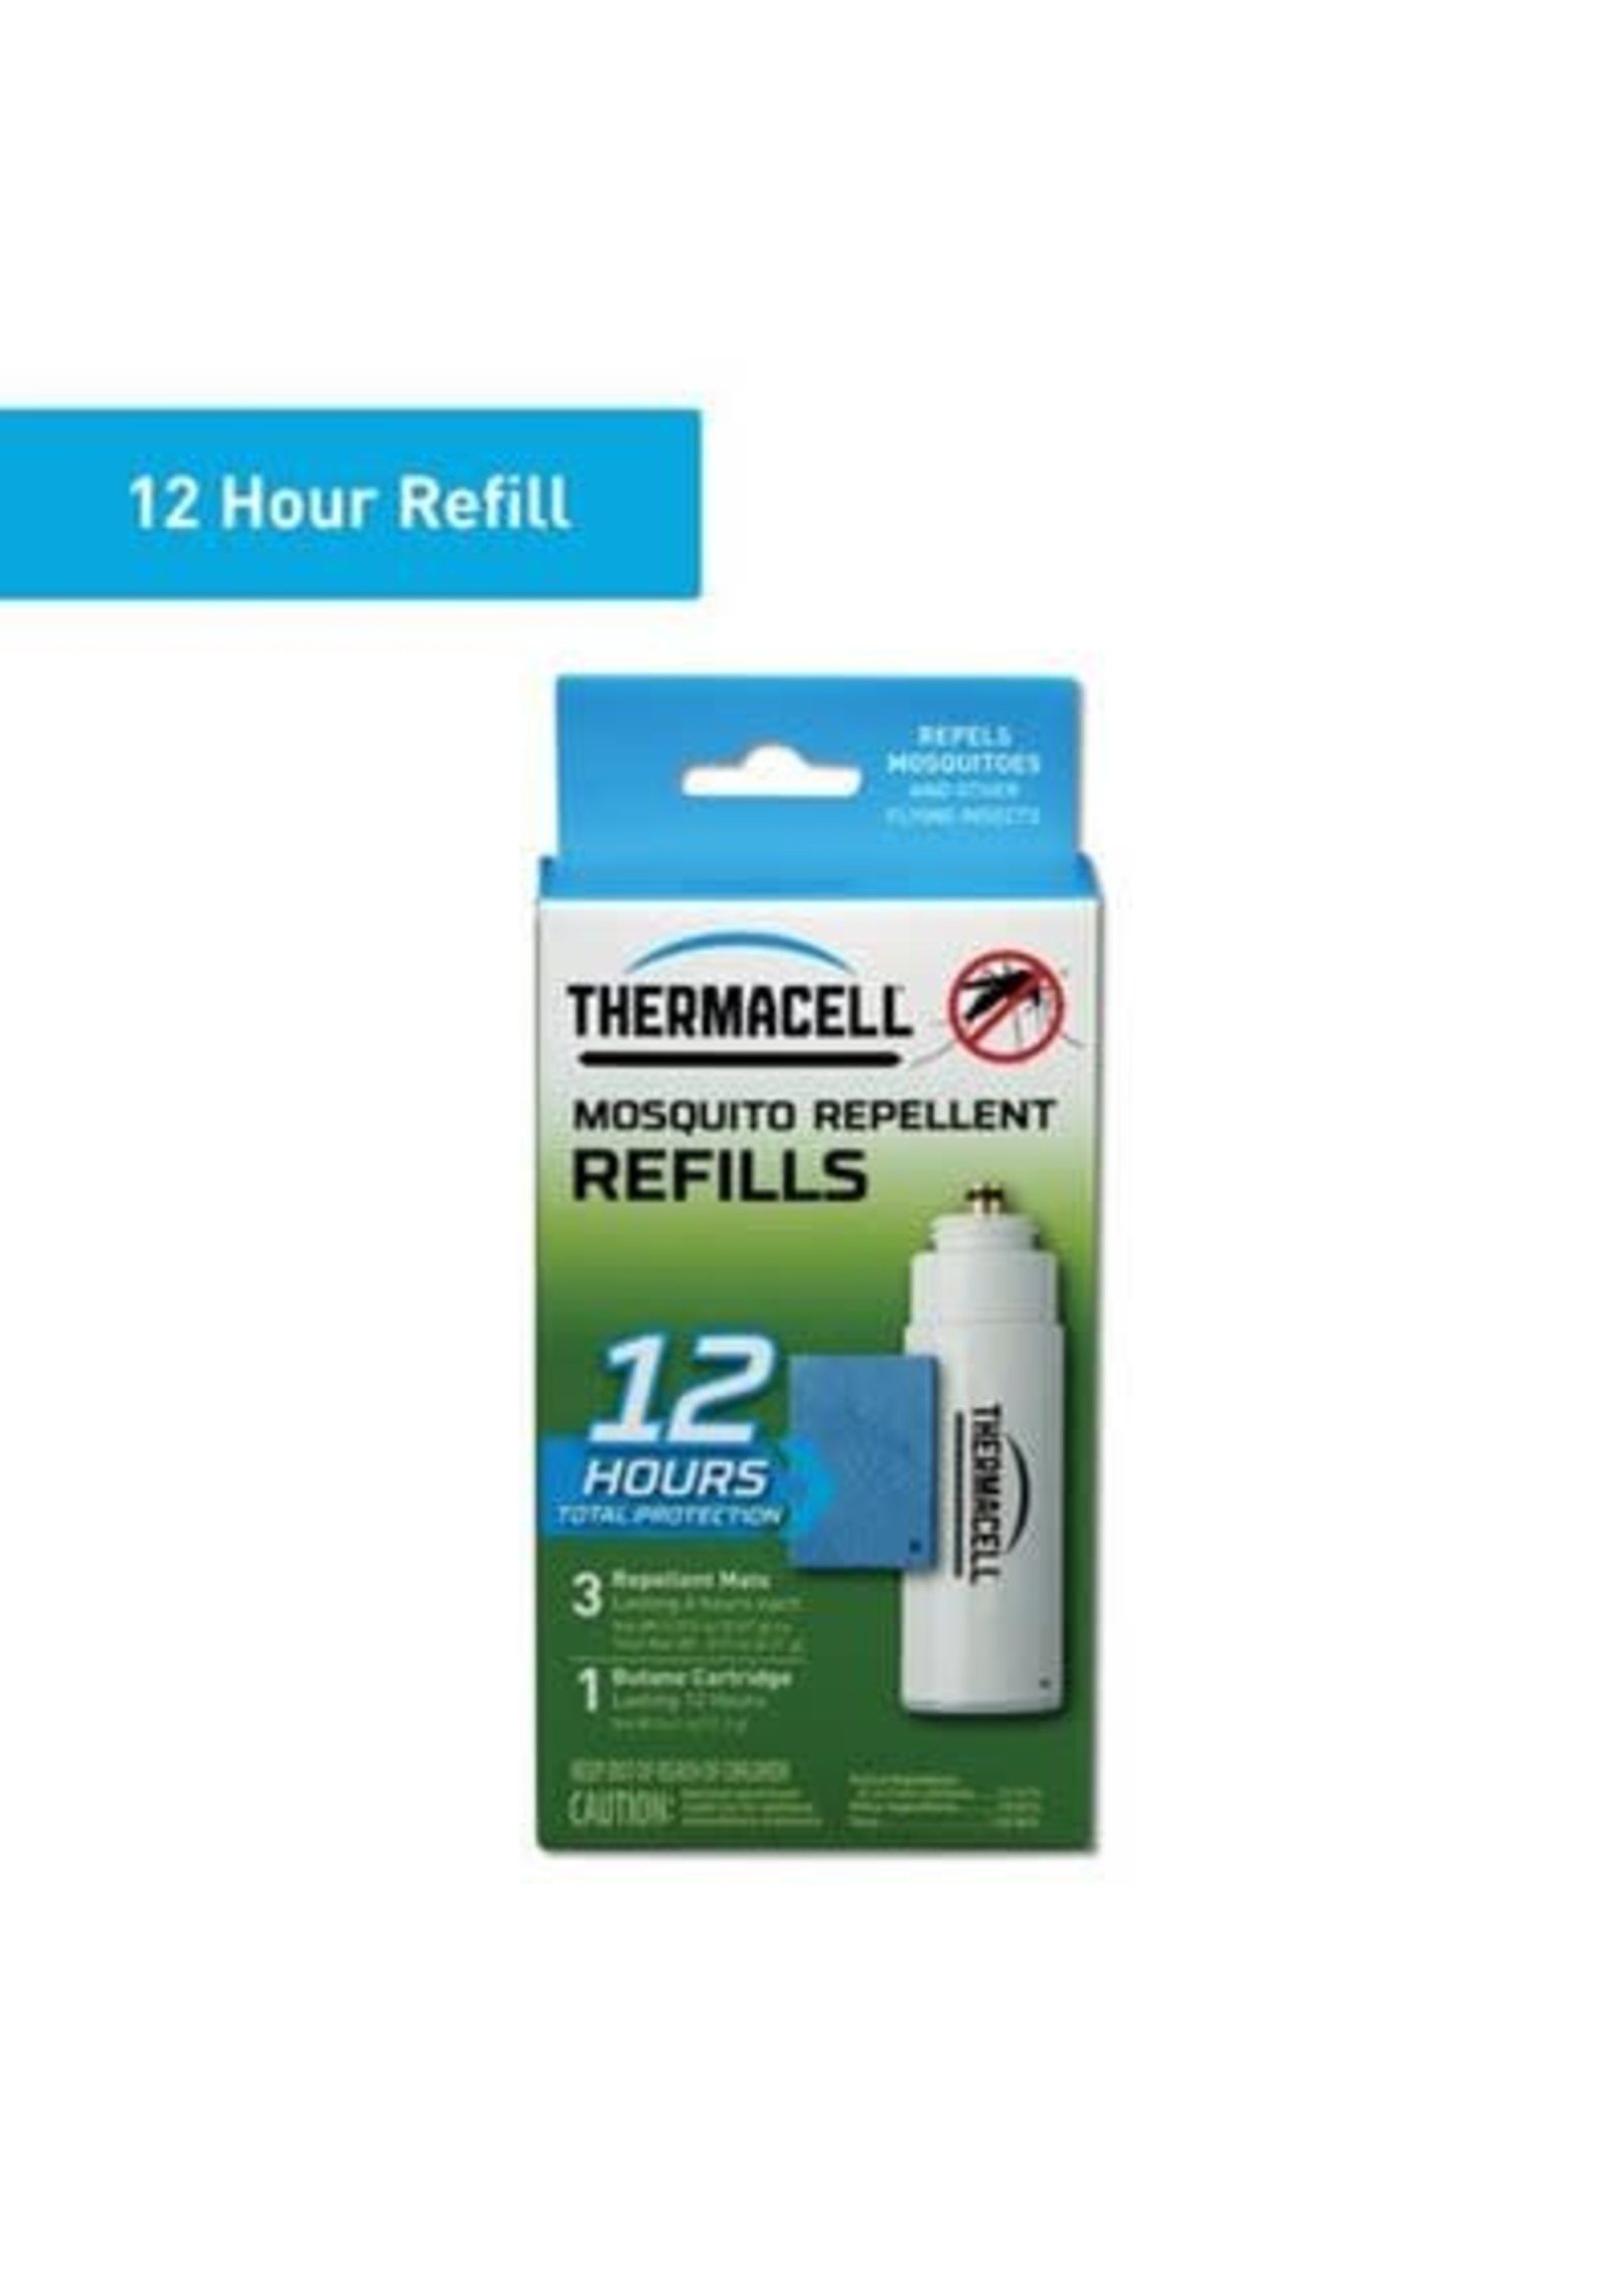 Thermacell mosquito area repellent refills 12h